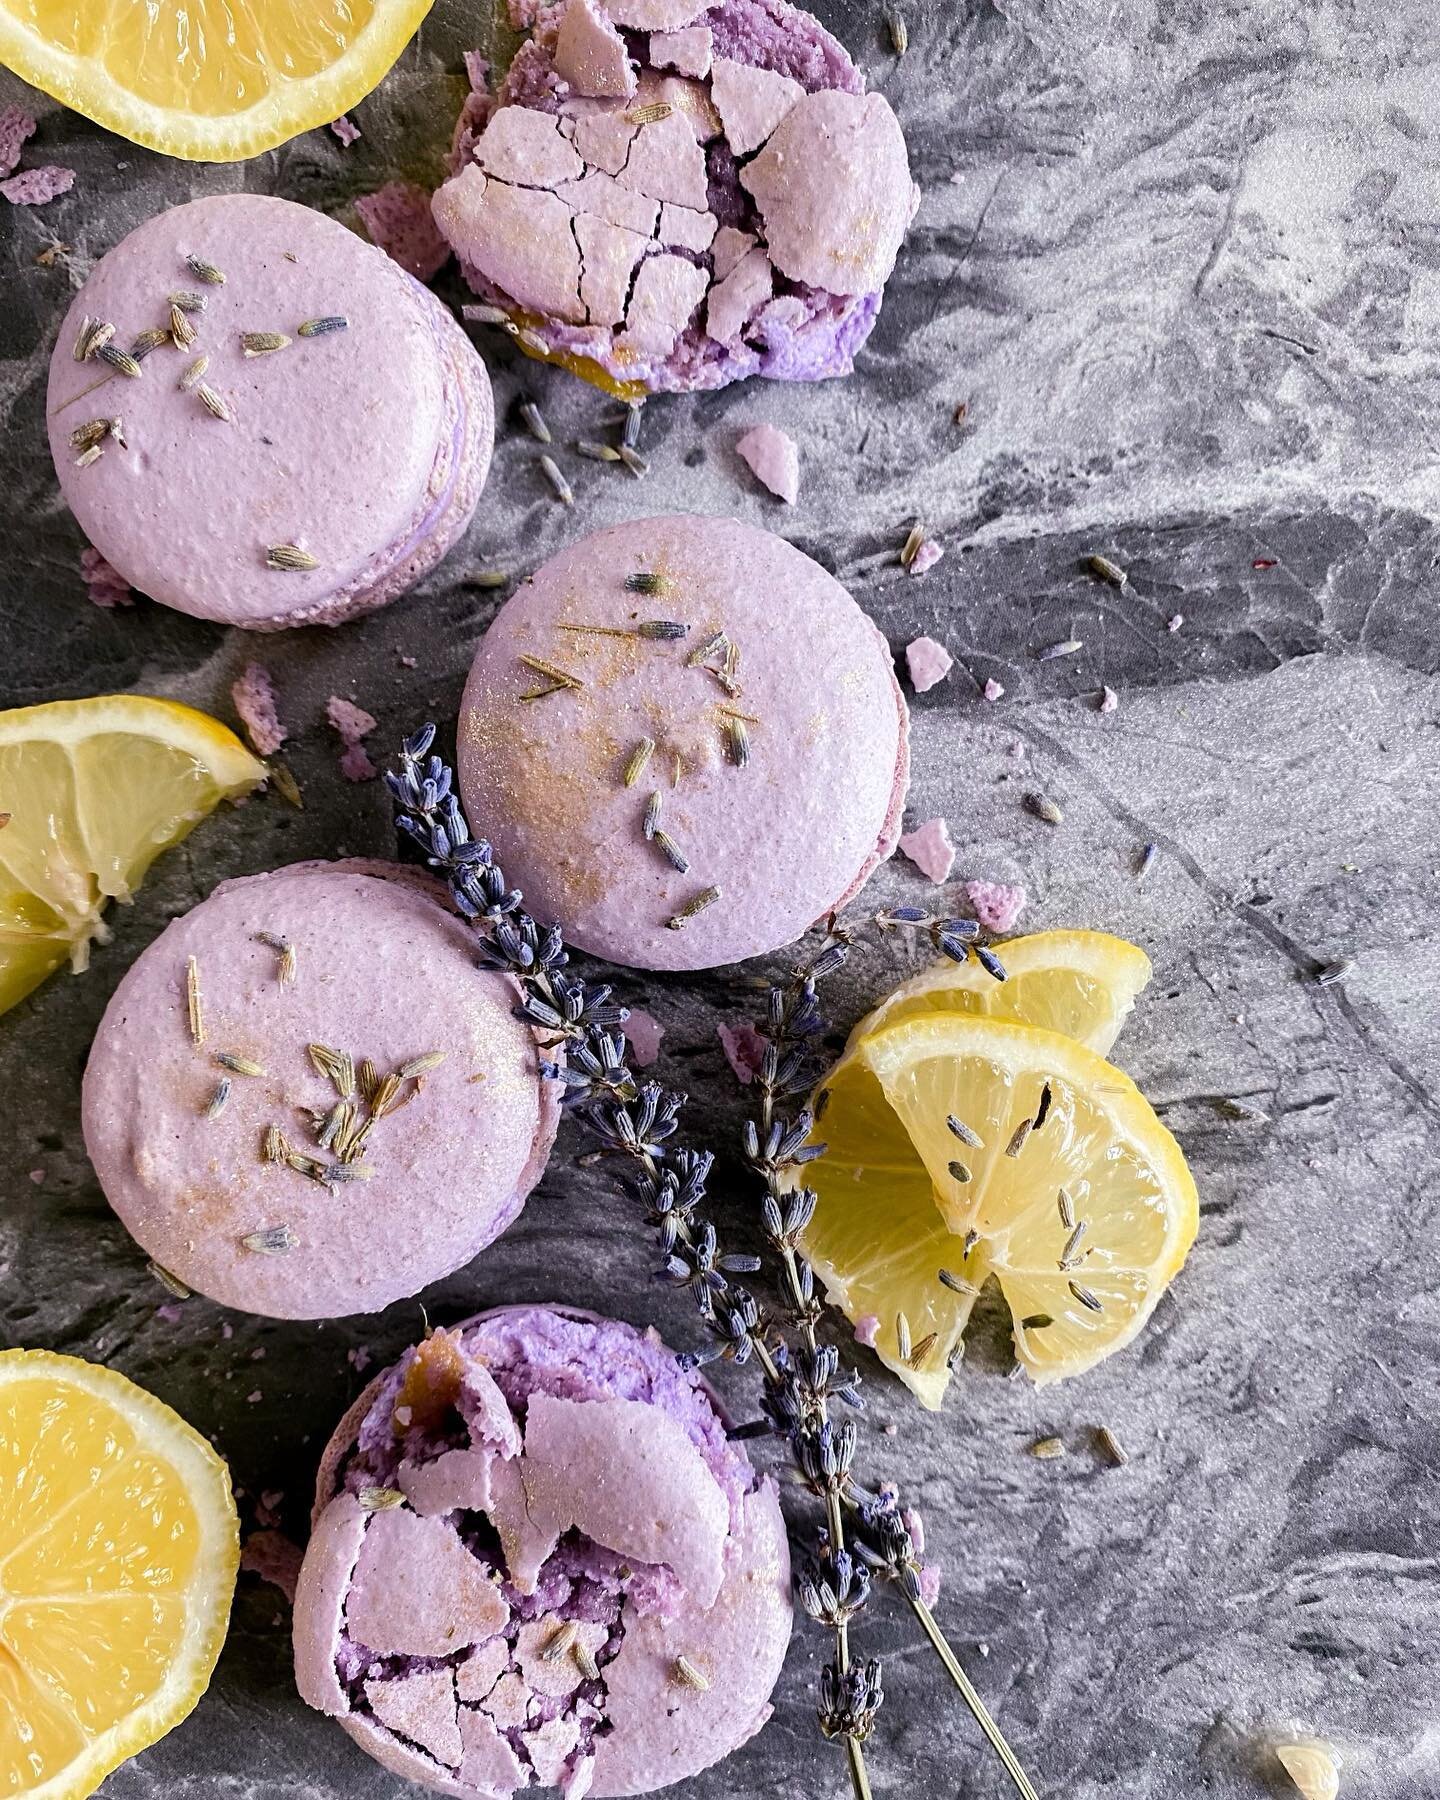 Lemon Lavender Macarons 💜🍋✨

These might be my favorite dessert. Also the most difficult to perfect, shoutout to my girl Caroline for originally teaching me how to make them. So far I&rsquo;ve only added flavors that are unique to me to our menu (l